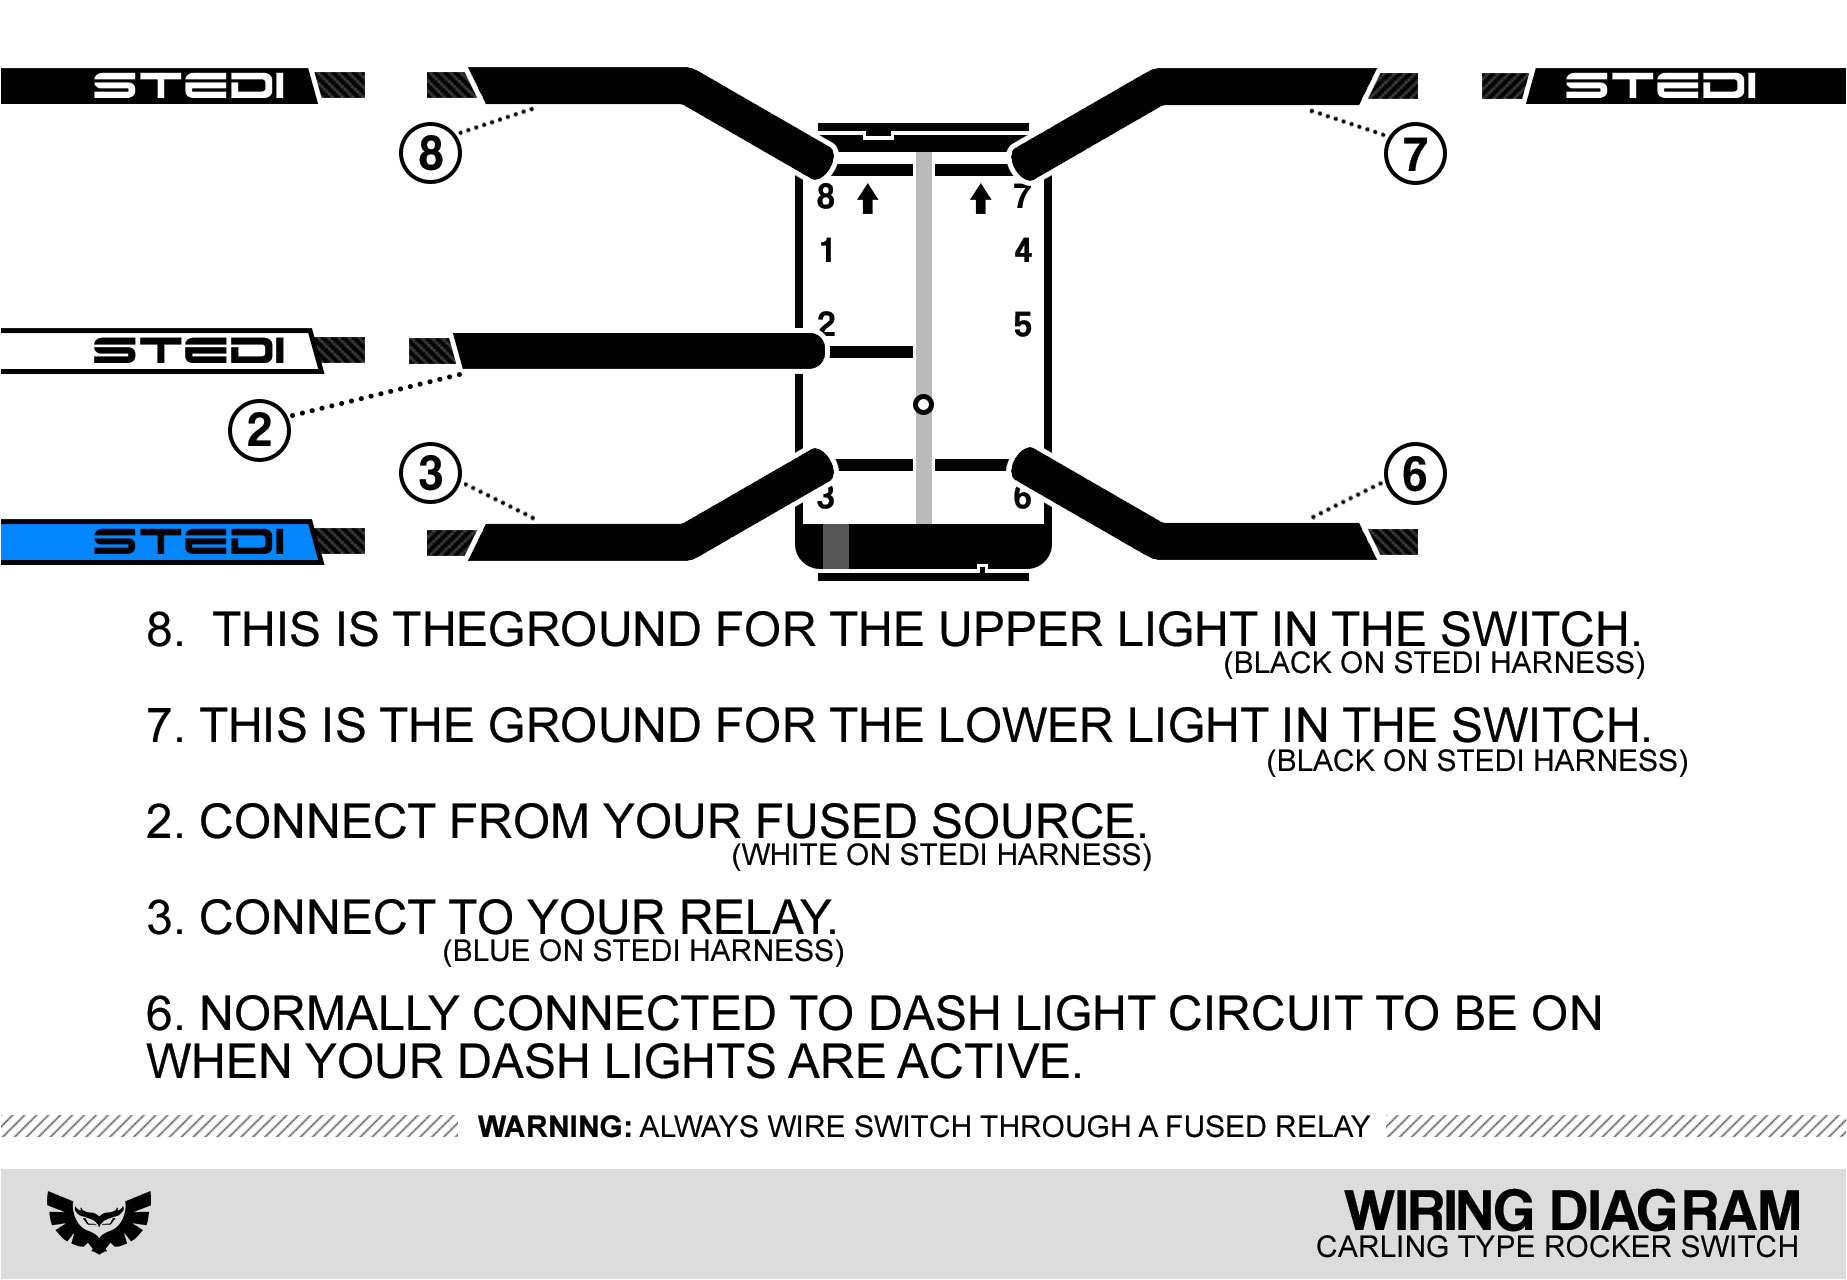 re how many spare wires do i need for arb carling switch blog new diagram rocker white wiring outstanding toggle picture jpg